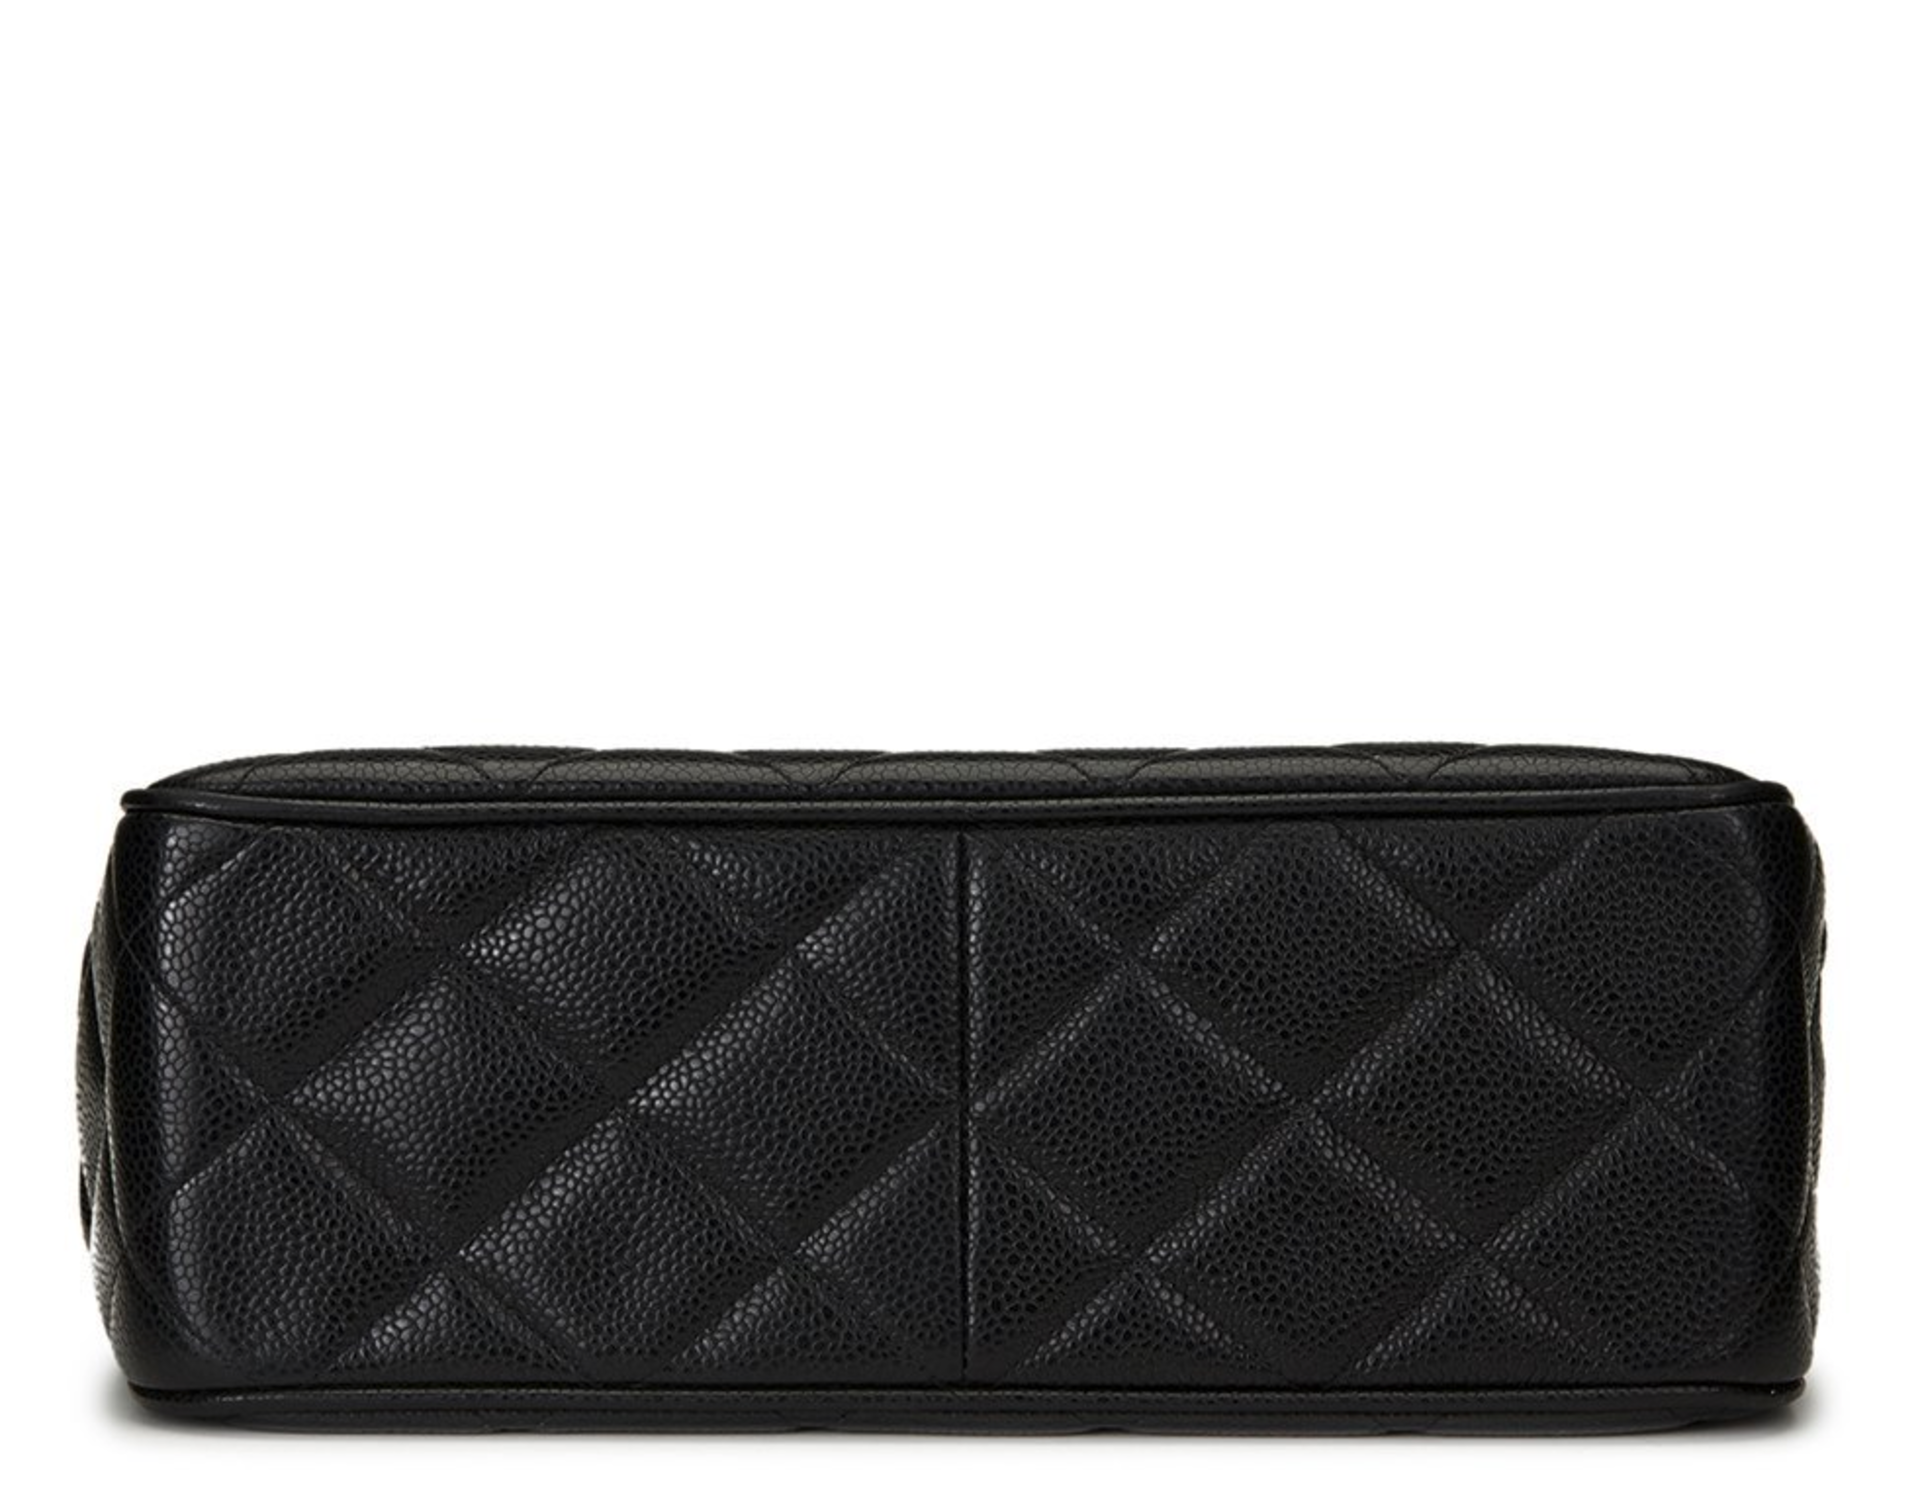 Black Quilted Caviar Leather Vintage XL Classic Single Flap Bag - Image 5 of 10